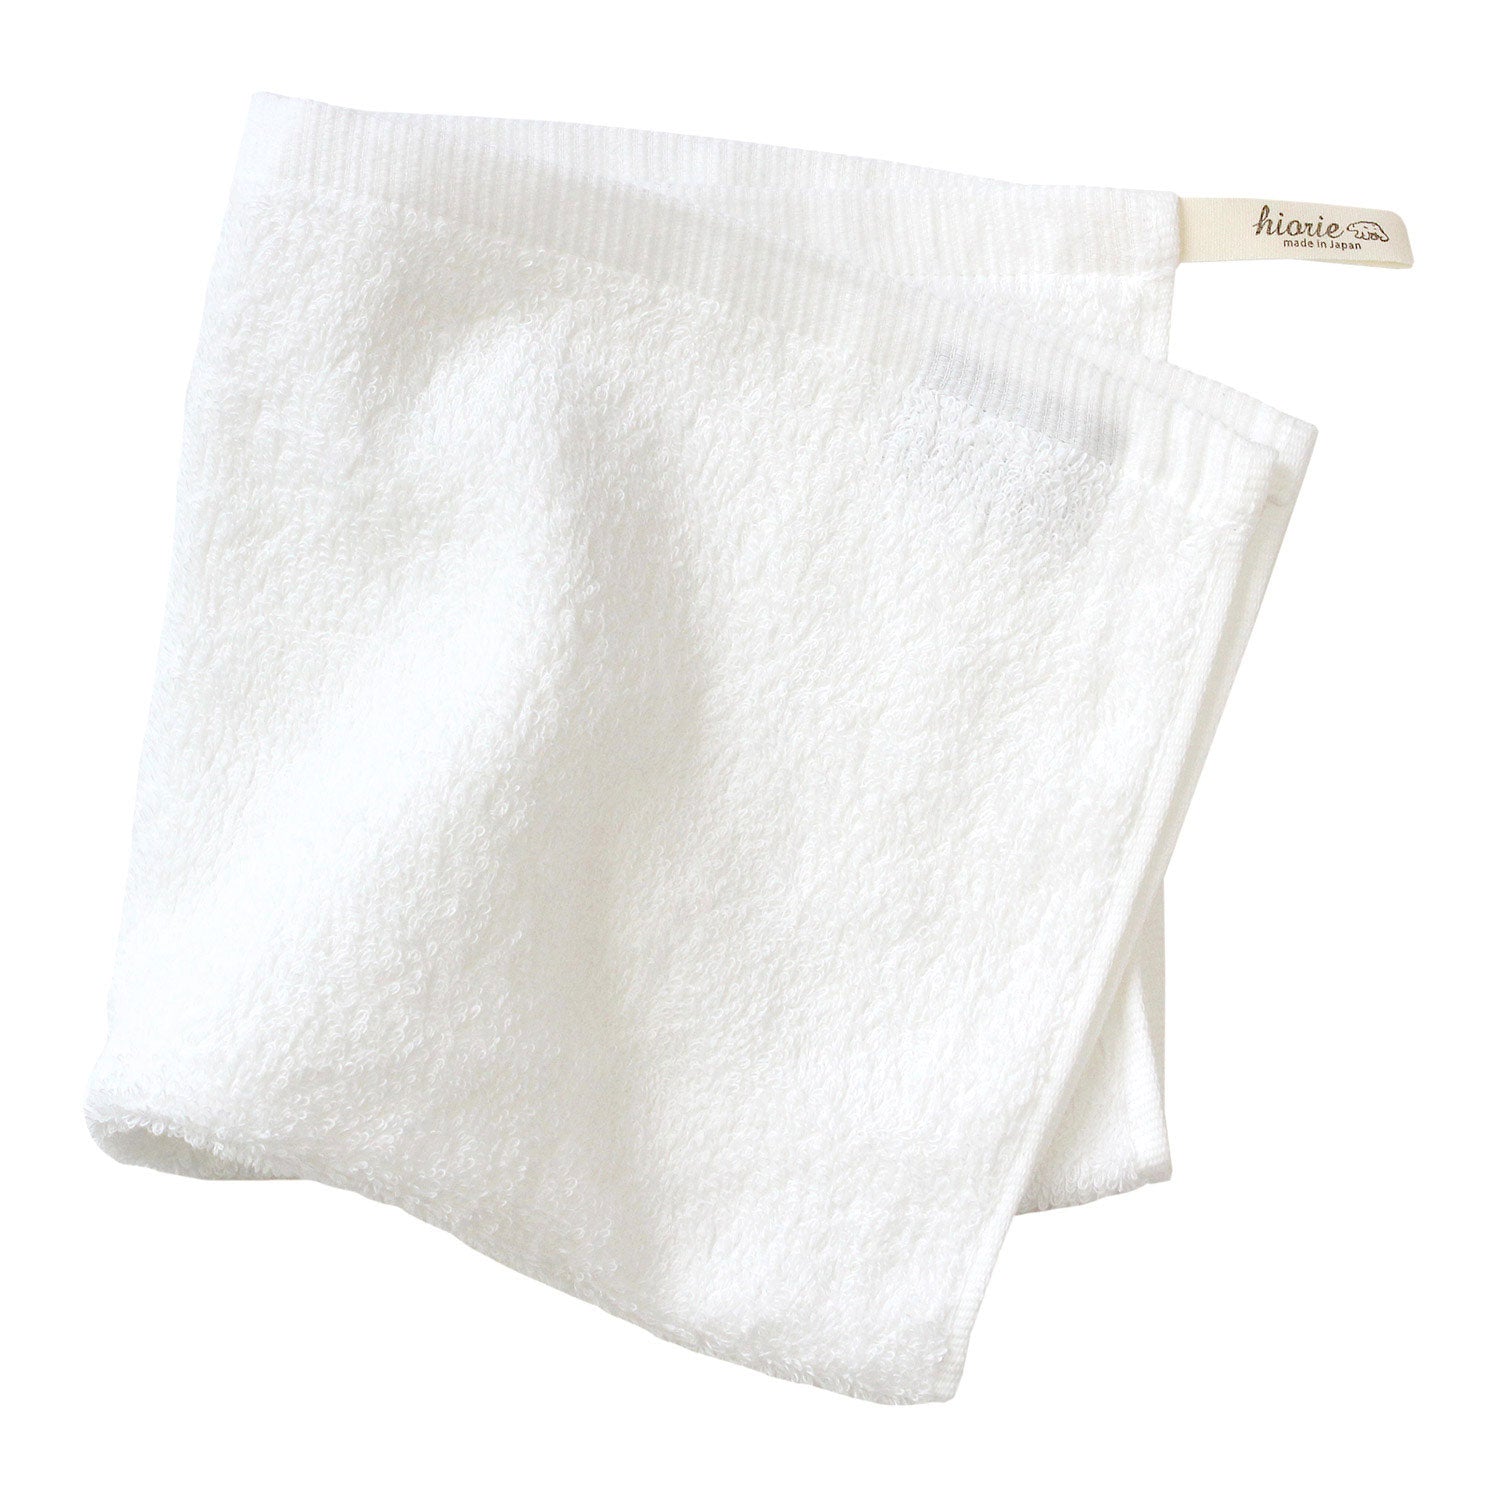 Hiorie Hotel Soft Bactericidal Water-Absorption Hand Towel Cotton 100% Japan